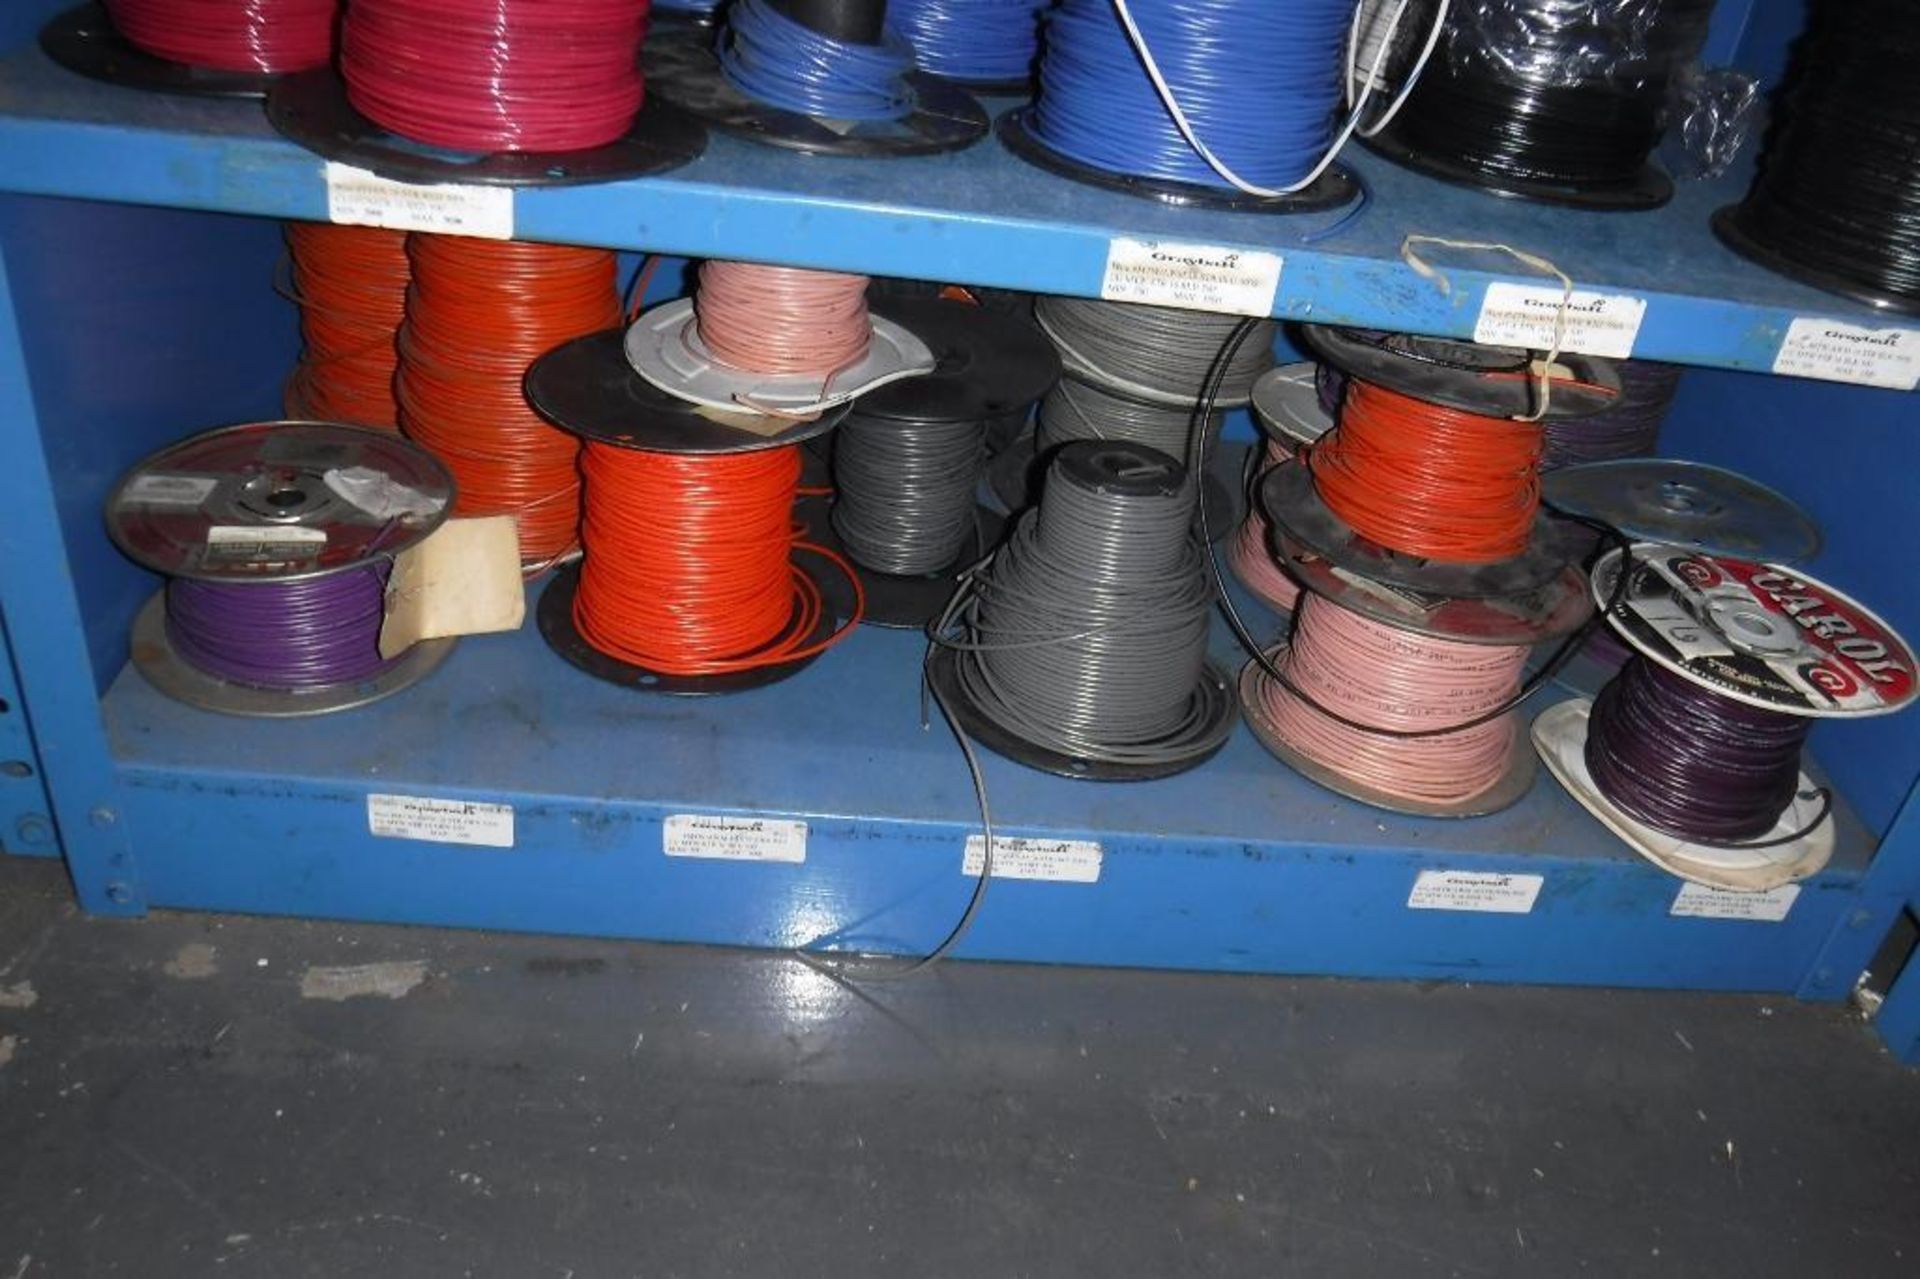 Contents of Rack 081S-Spools of Wire, MUST REMOVE BY 2/14/20-MUST BE REMOVED IN THE ENTIRITY - Image 8 of 8